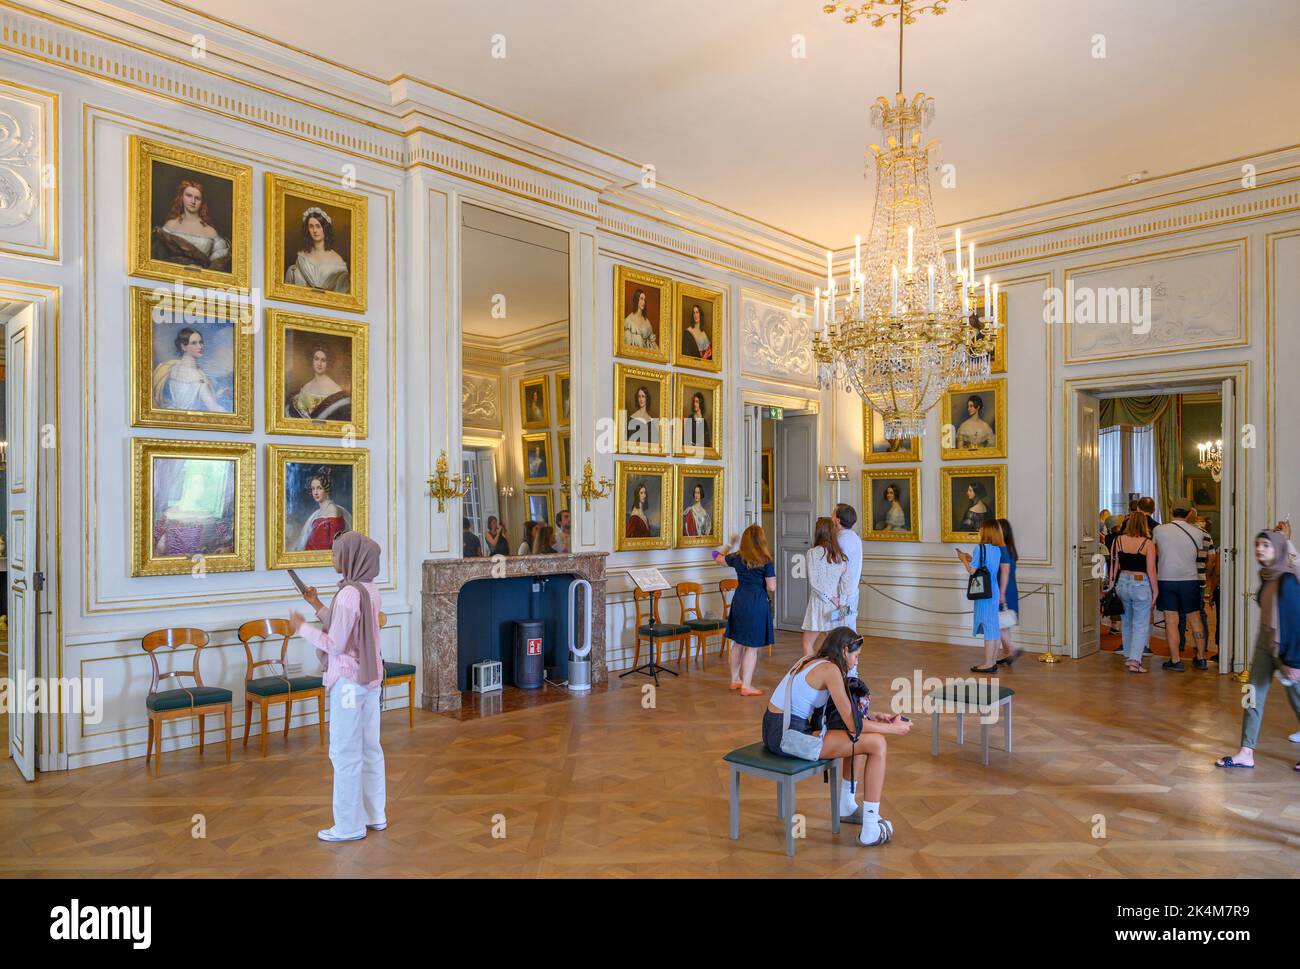 King Ludwig I's Gallery of Beauties, Nymphenburg Palace (Schloss Nymphenburg), Munich, Bavaria, Germany Stock Photo